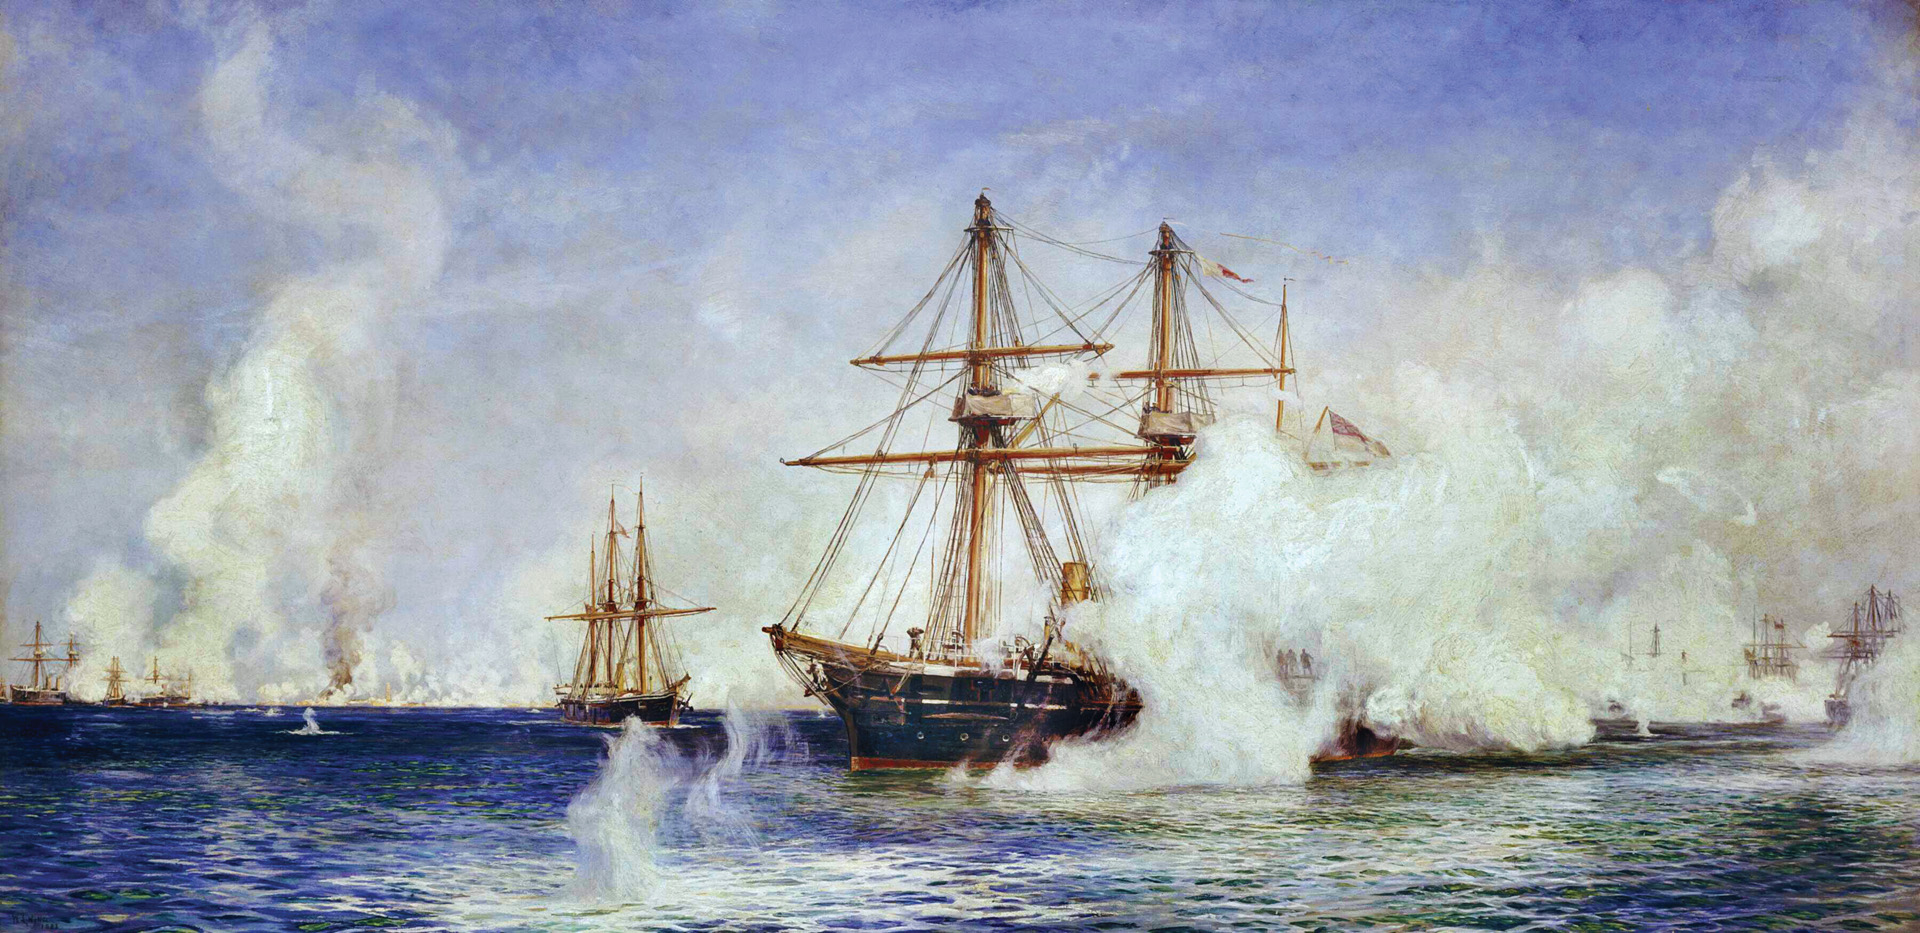 Fifteen ironclads in the British fleet shattered Egyptian shore defenses at the port of Alexandria. 